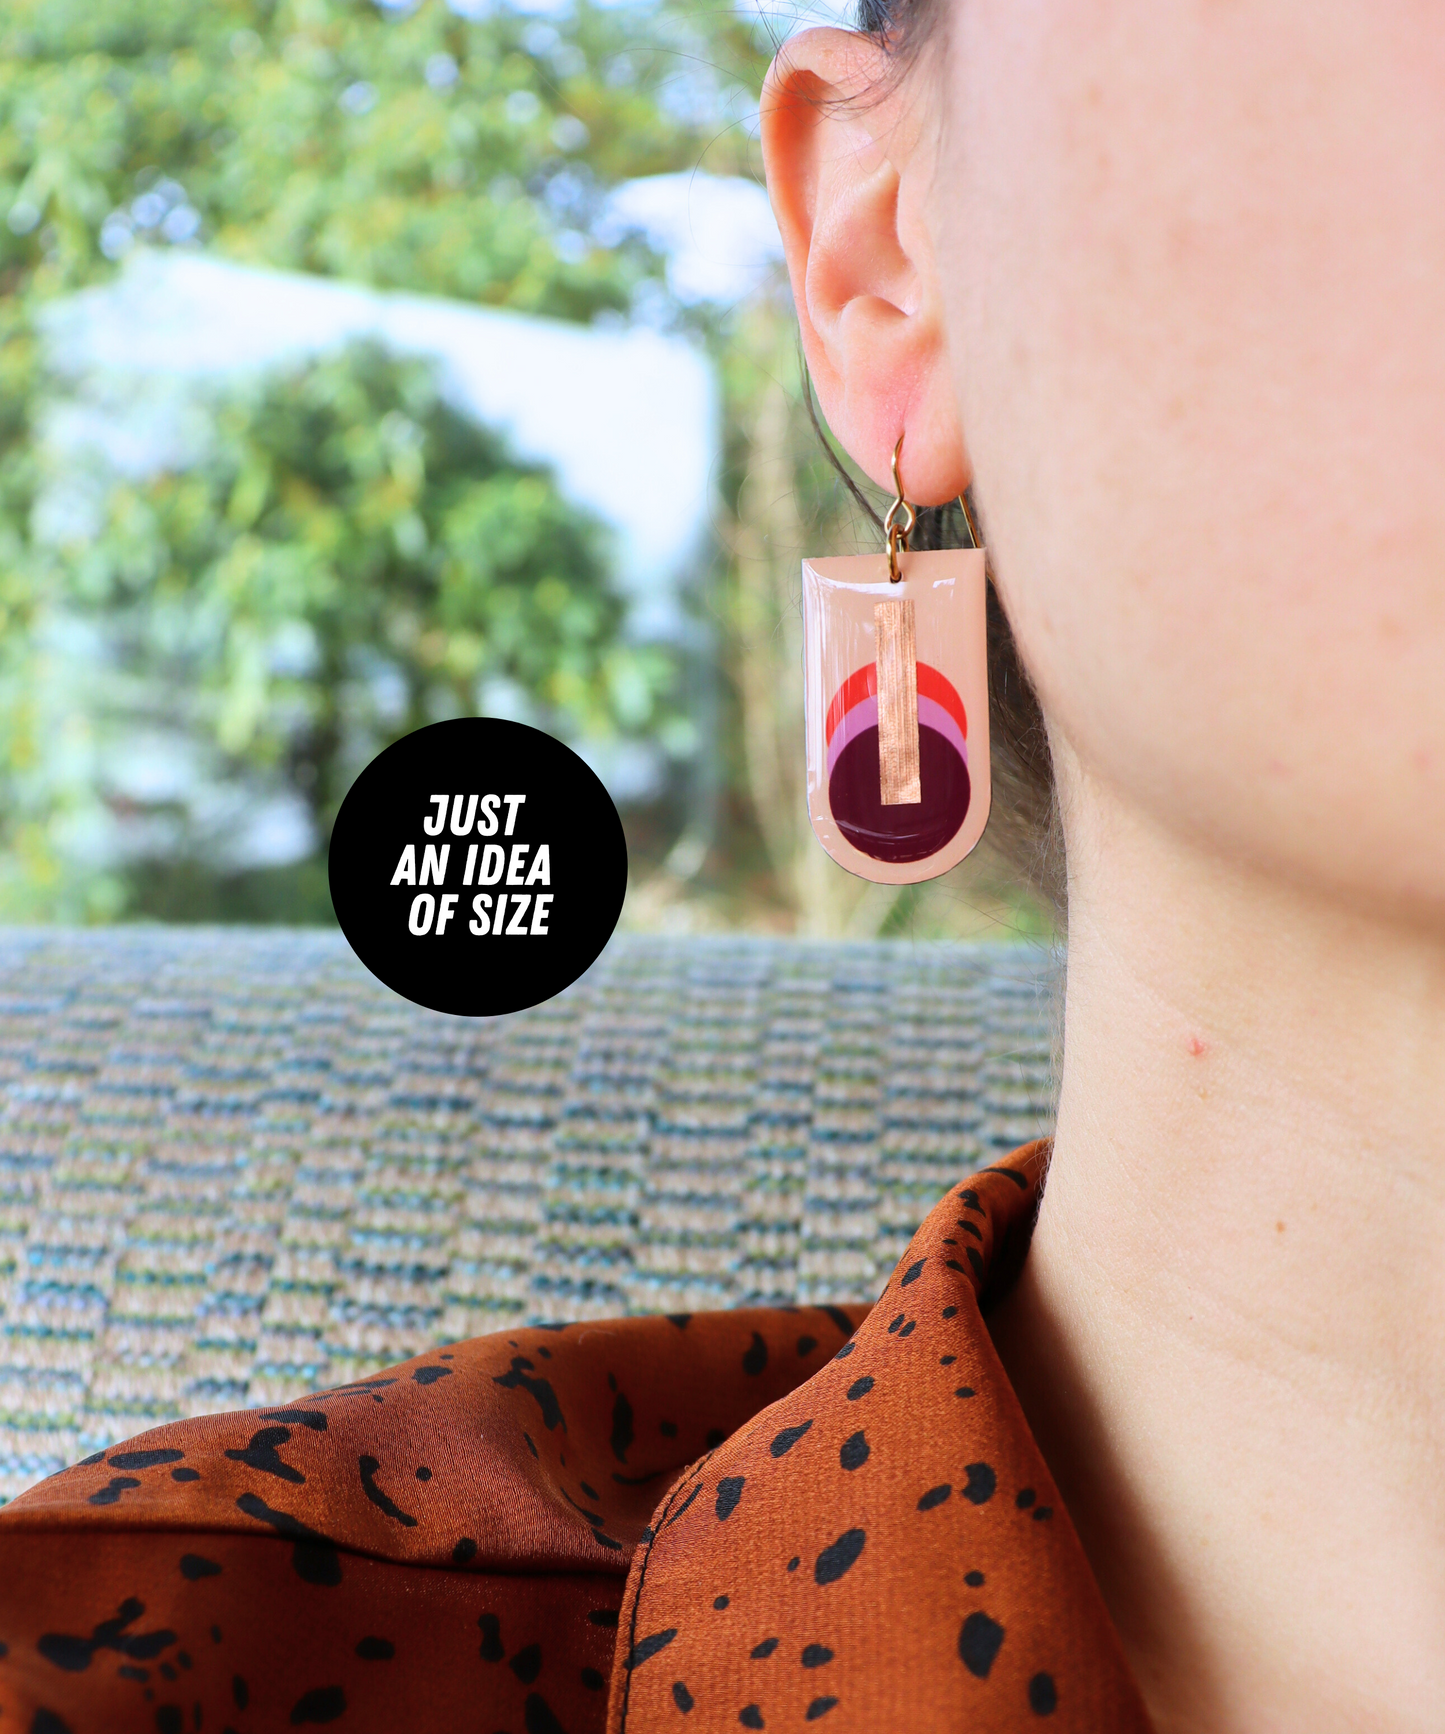 Quirky graphic art earrings made from recycled vinyl records